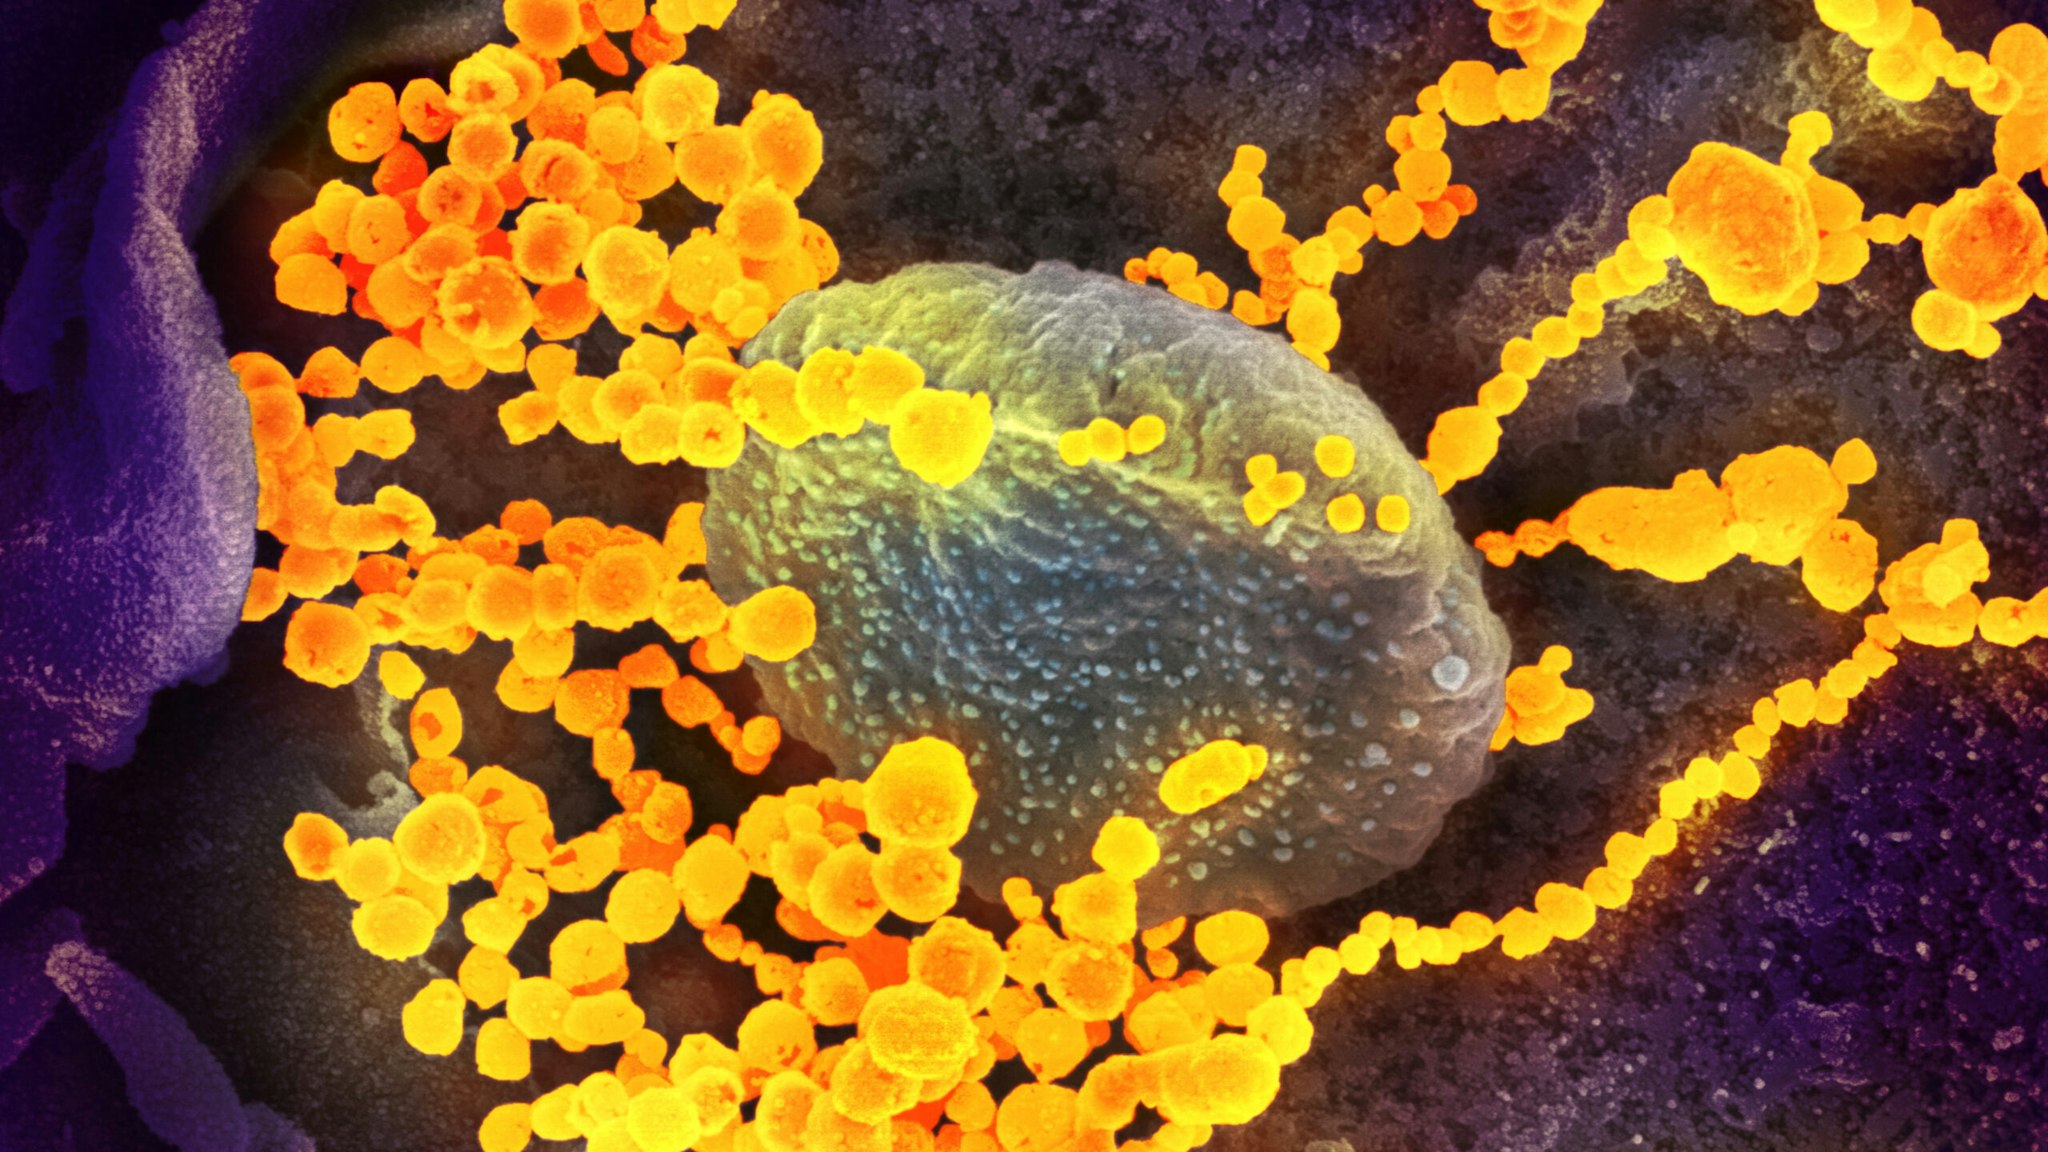 This scanning electron microscope image shows SARS-CoV-2 (round gold objects) emerging from the surface of cells cultured in the lab. SARS-CoV-2, also known as 2019-nCoV, is the virus that causes COVID-19. The virus shown was isolated from a patient in the U.S. Image captured and colorized at NIAID's Rocky Mountain Laboratories (RML) in Hamilton, Montana.